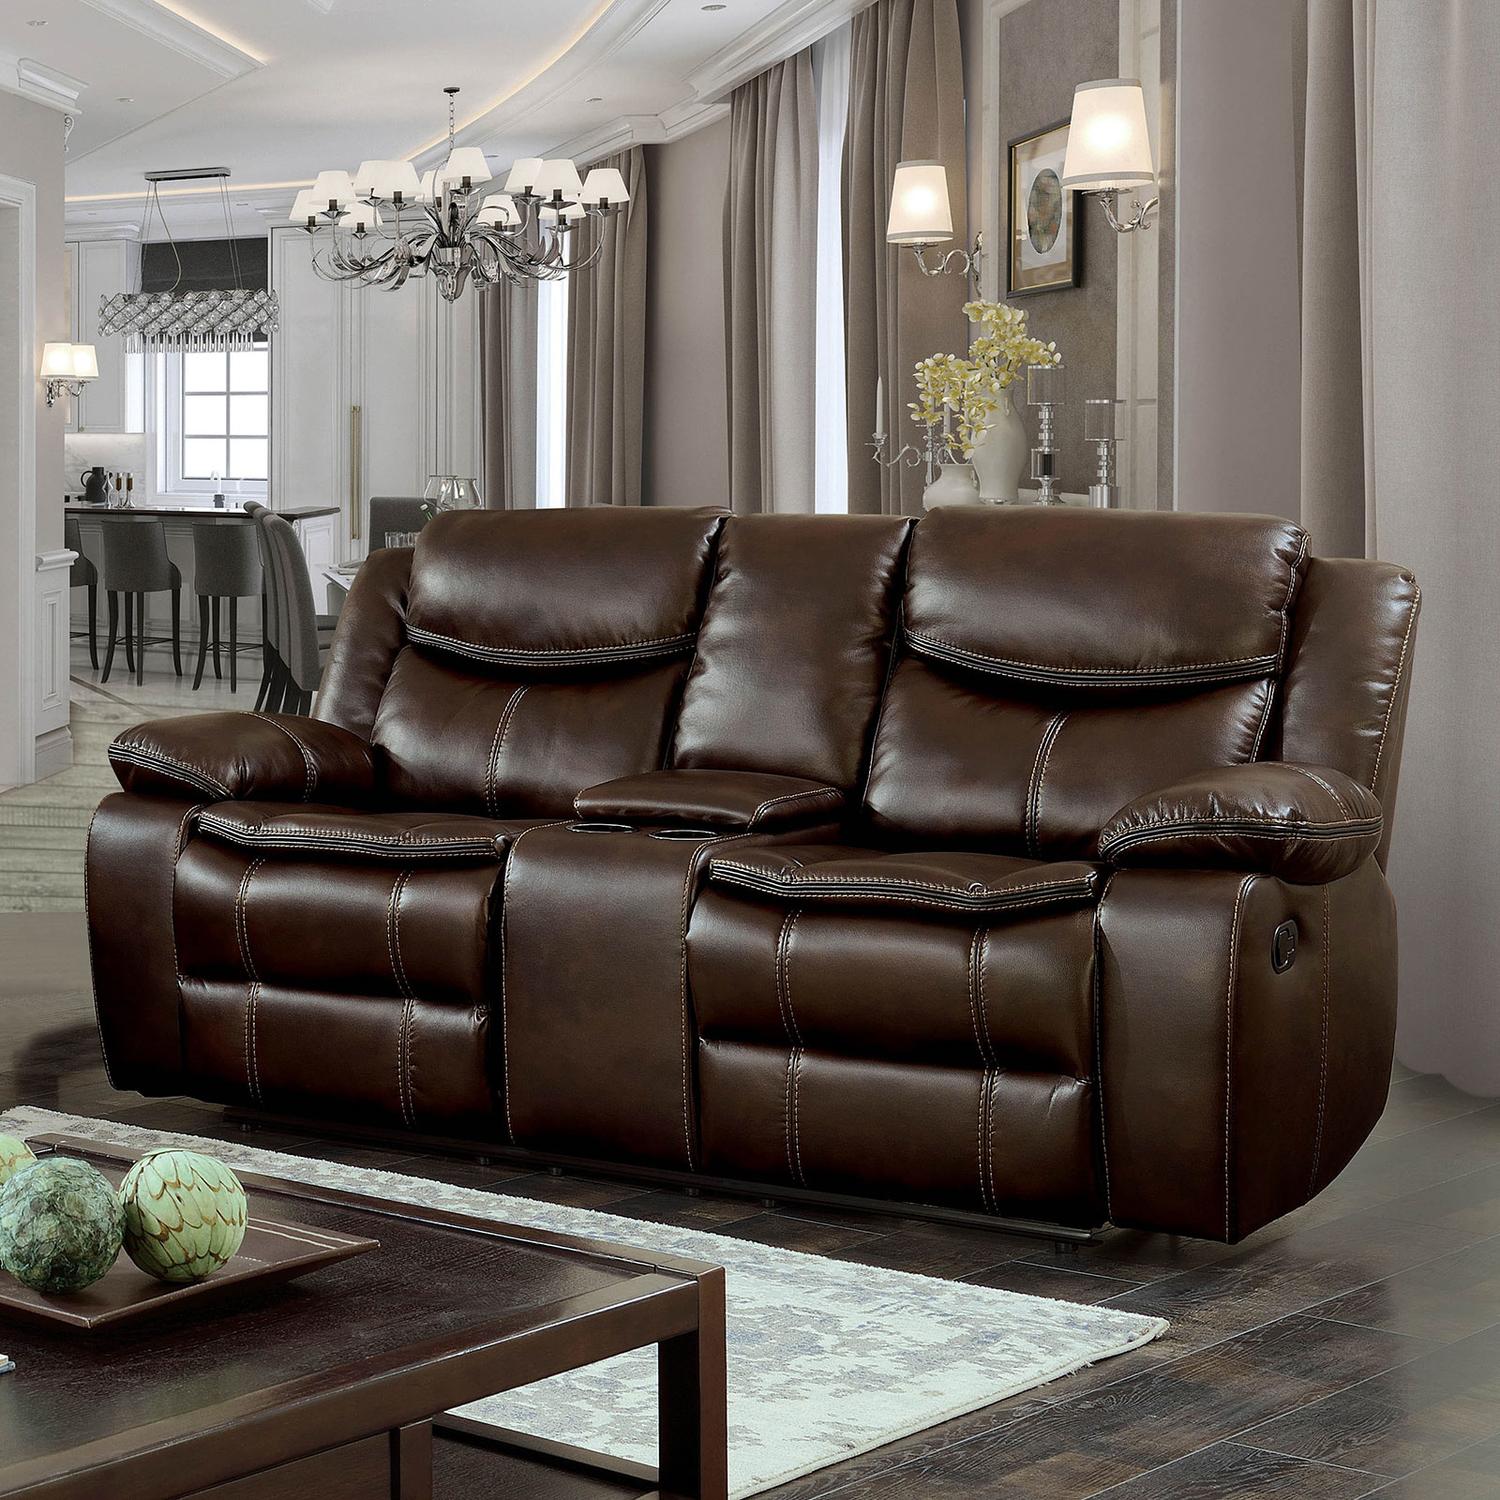 Transitional Recliner Loveseat CM6981BR-LV-CT Pollux CM6981BR-LV-CT in Brown 